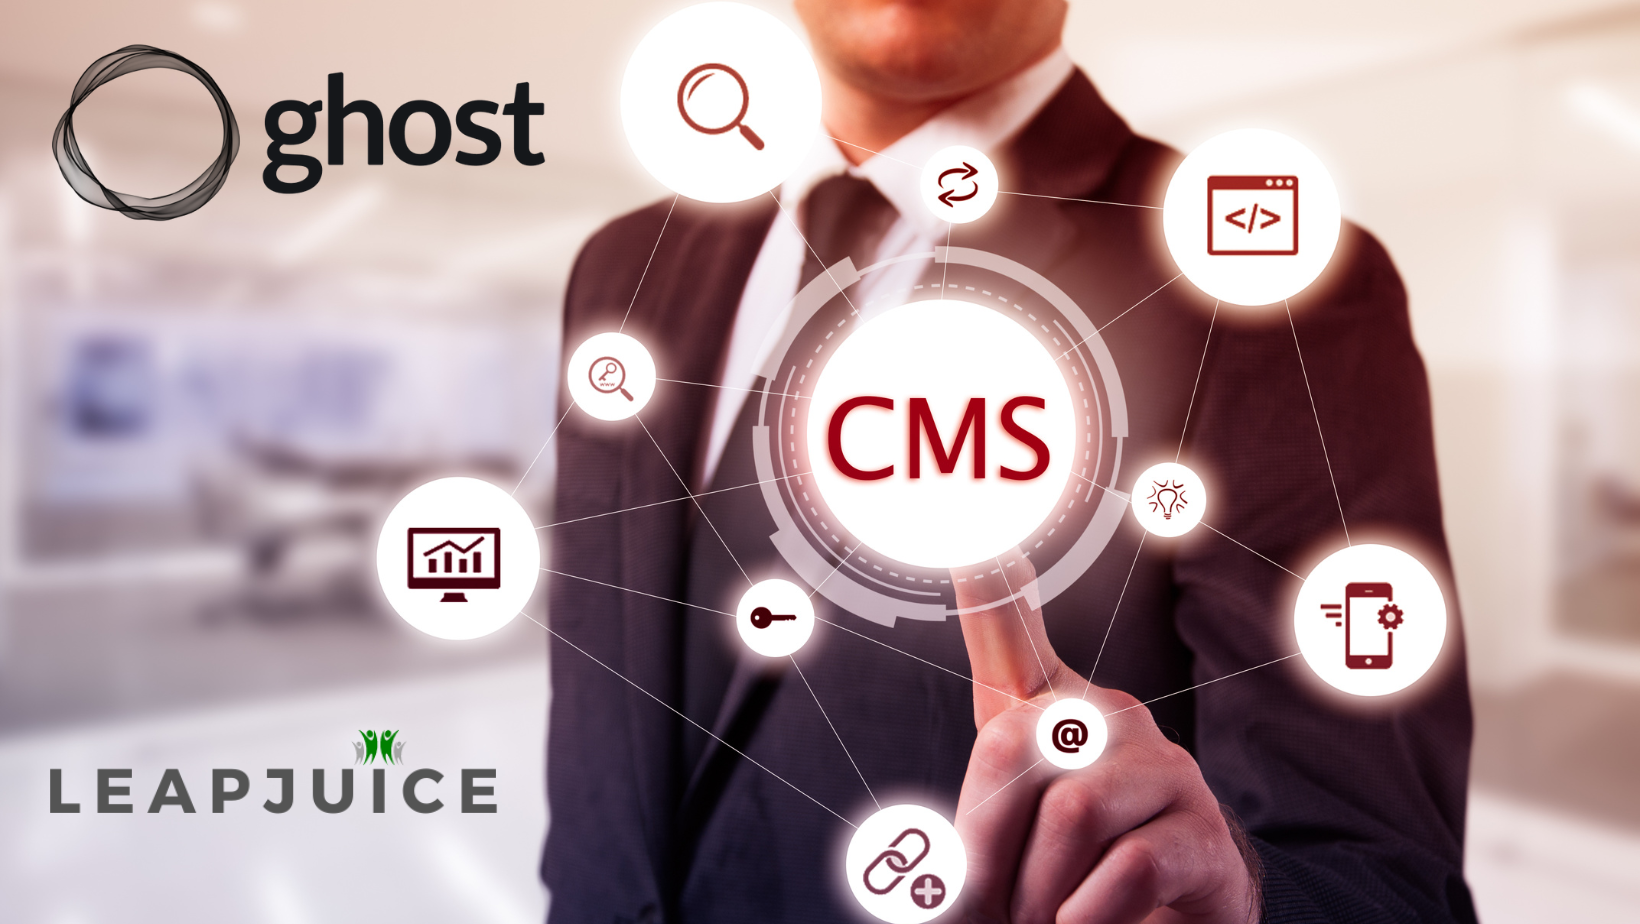 Network with man pushing on Ghost CMS. Leapjuice logo appears in corner to represent Managed Ghost CMS hosting.